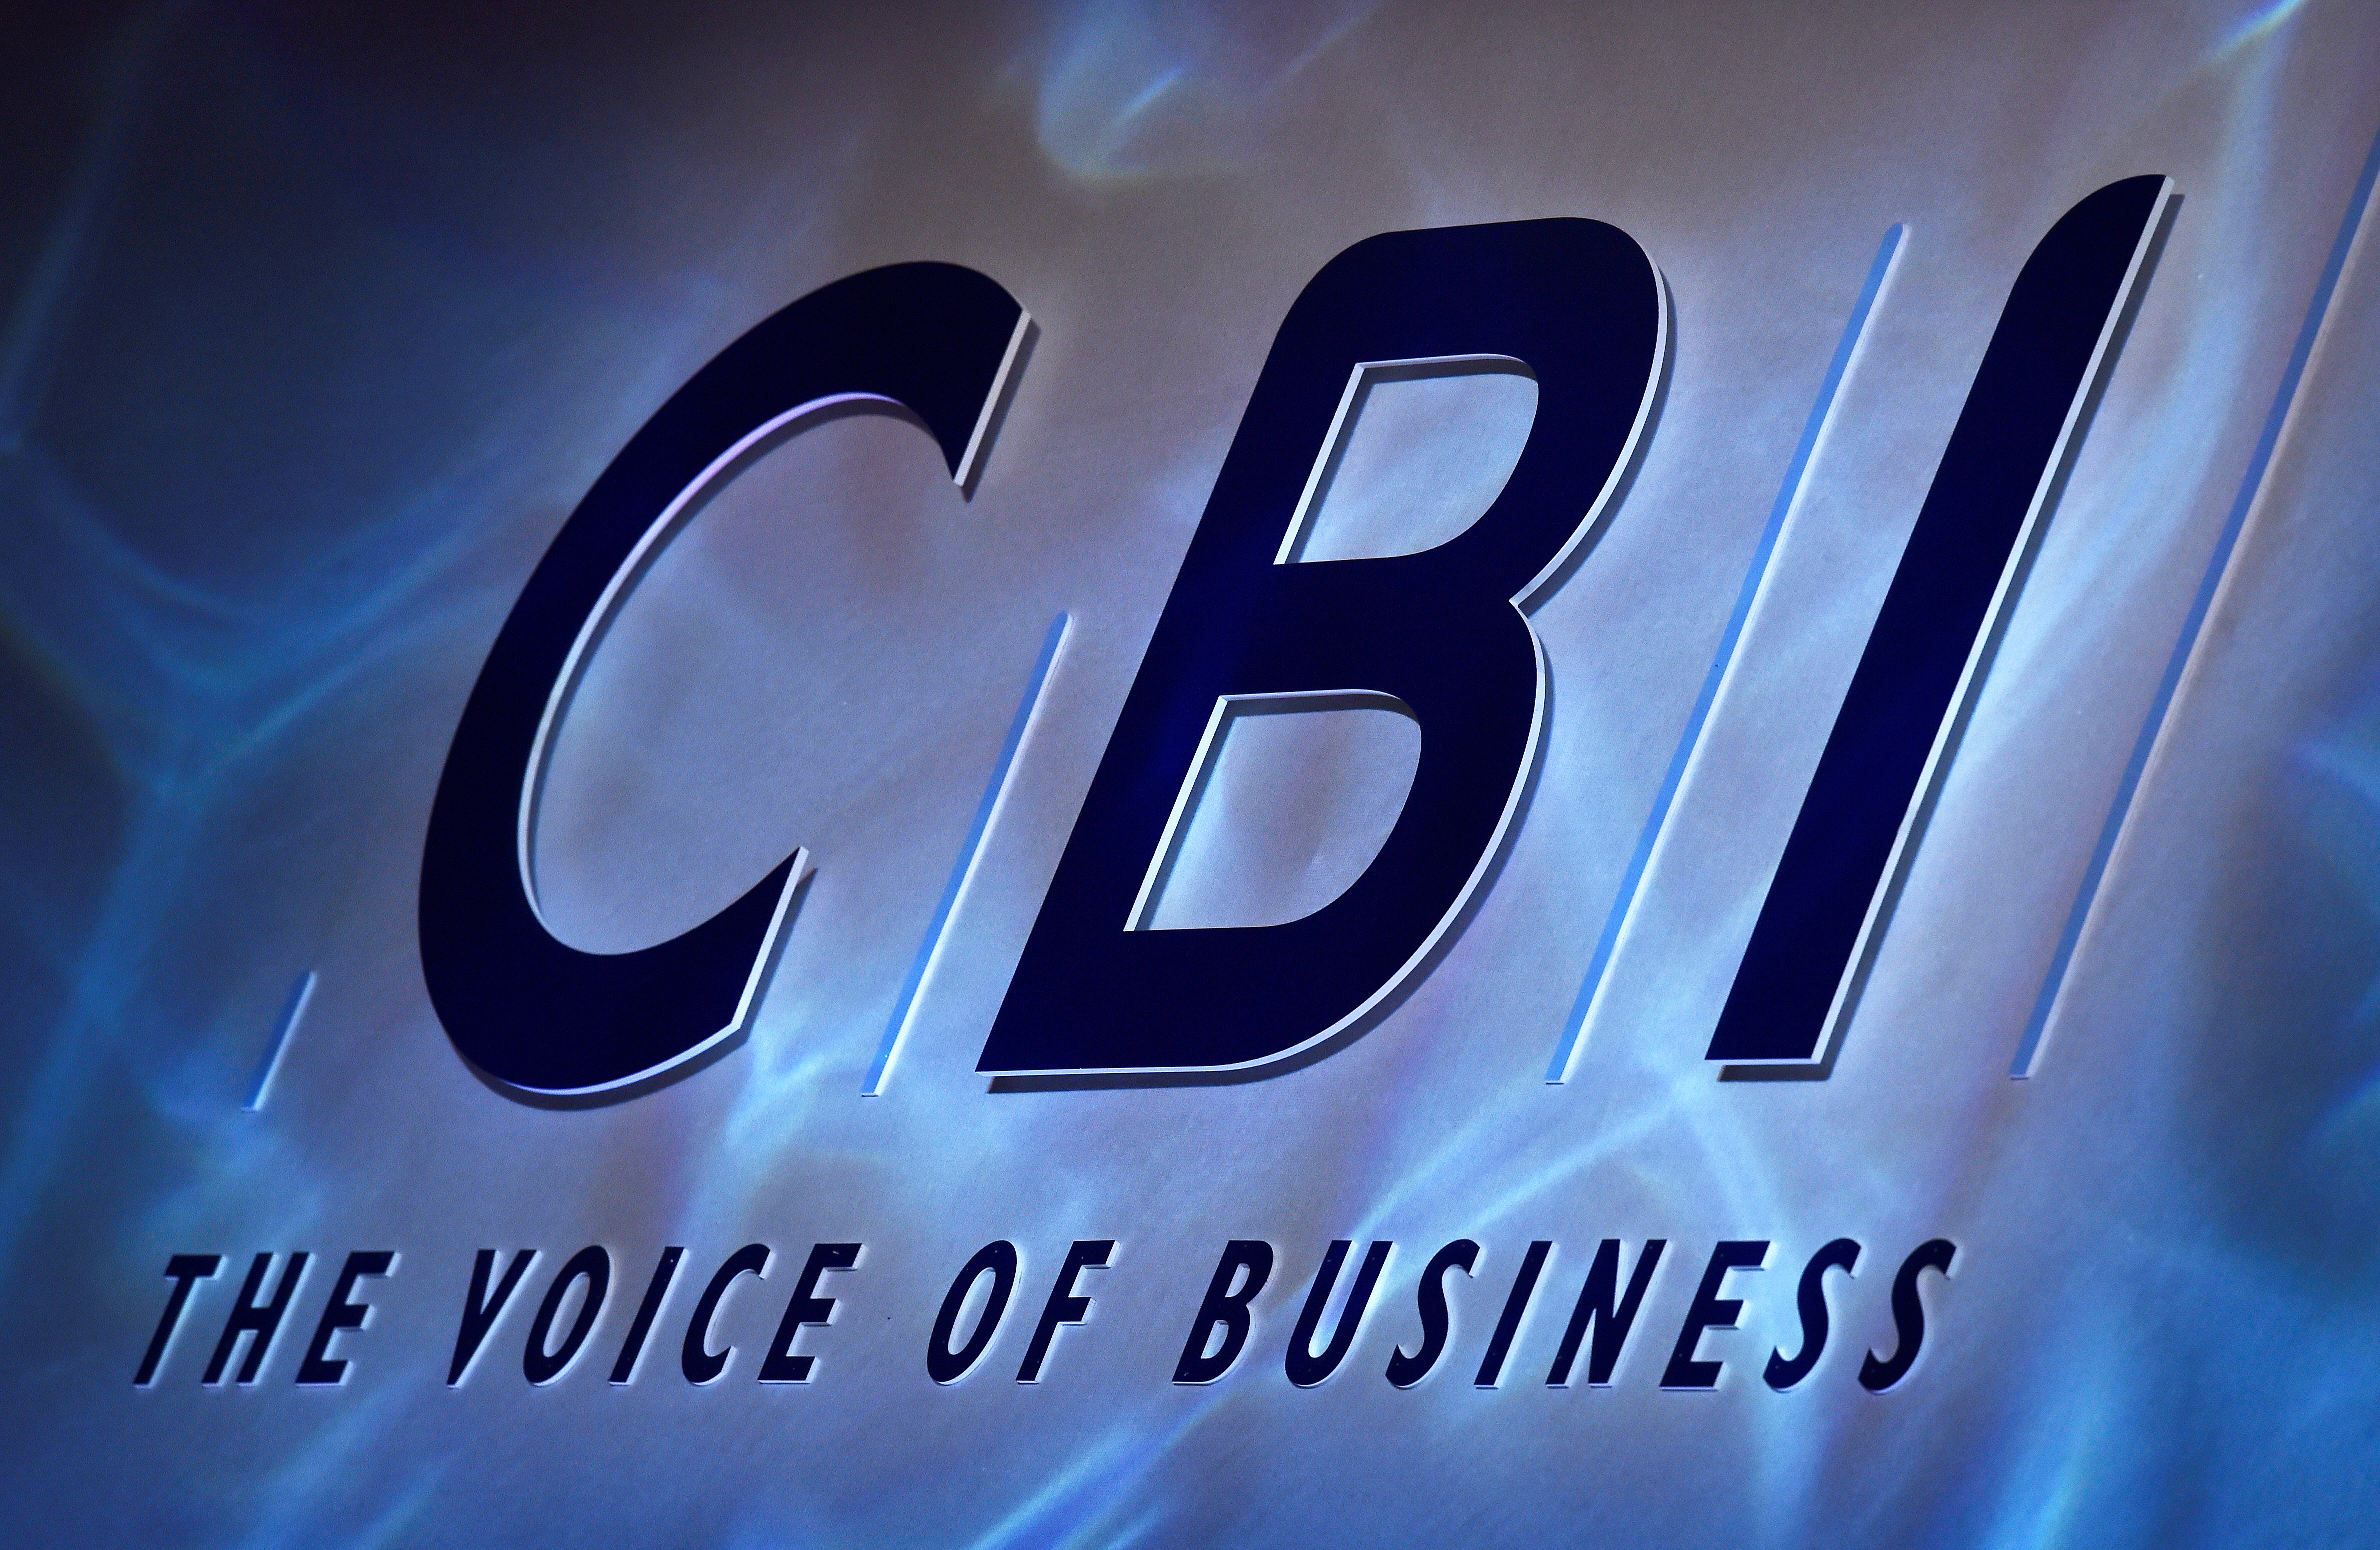 A Confederation of British Industry (CBI) logo is seen during their annual conference in London